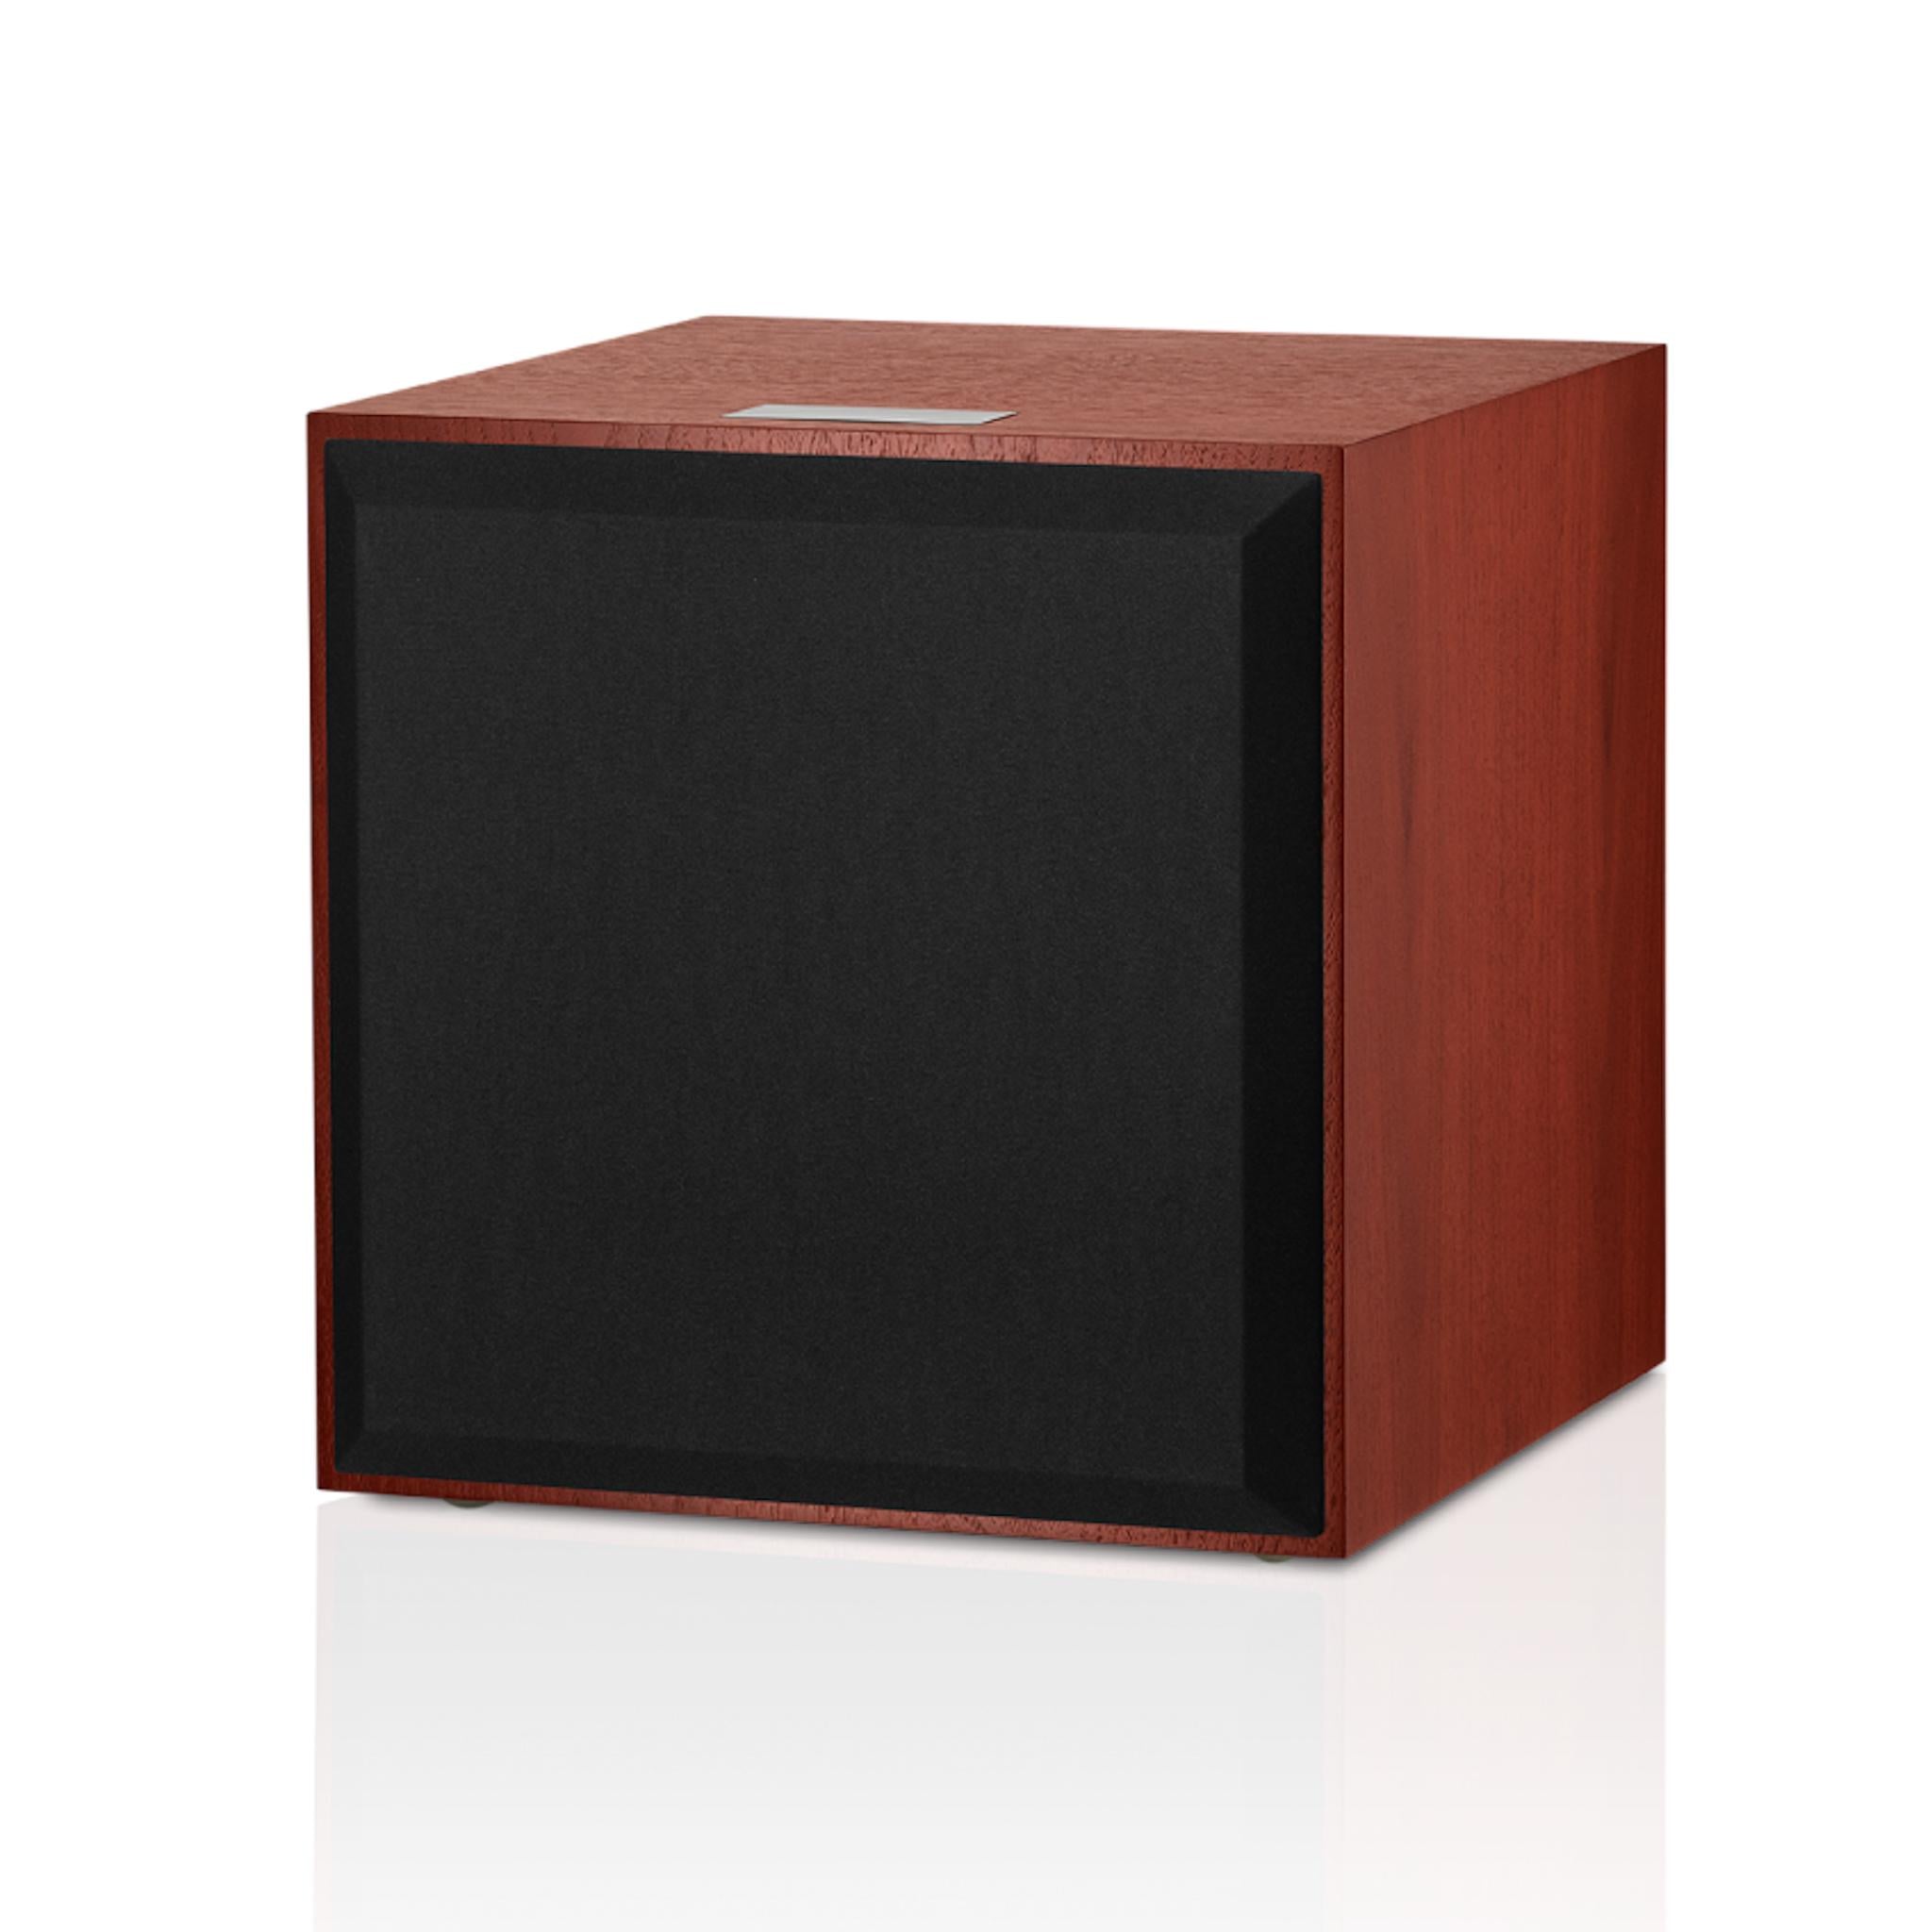 Bowers & Wilkins DB4S - Active Subwoofer - AVStore